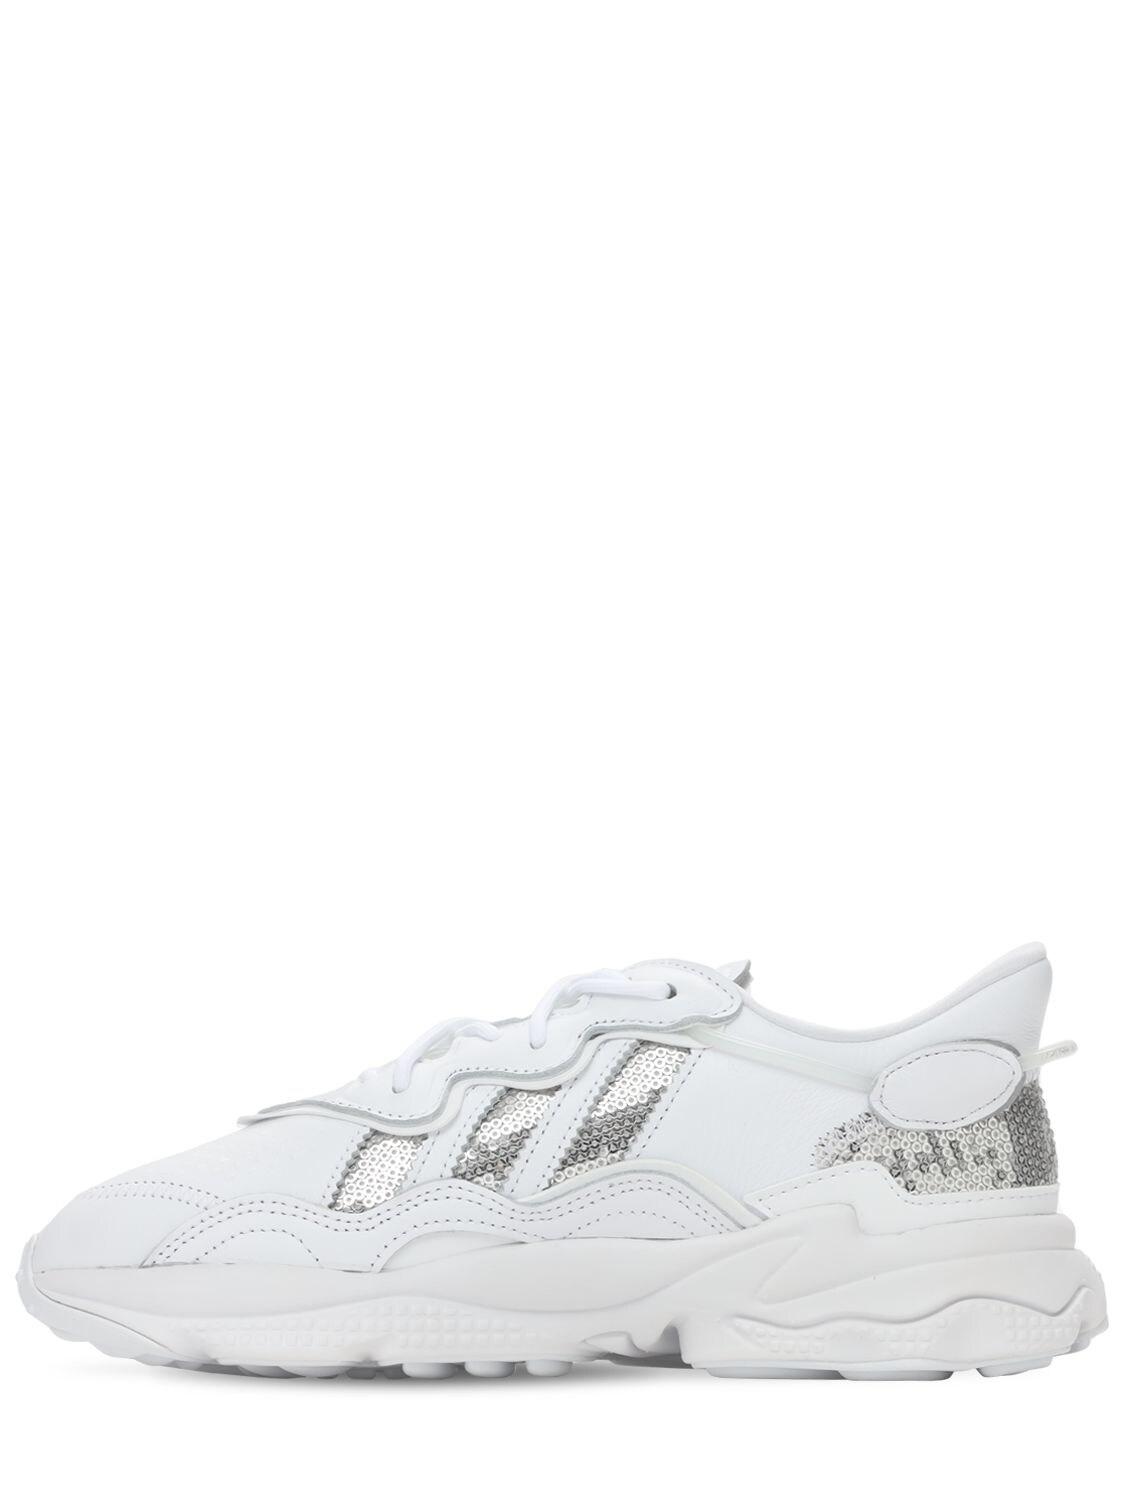 adidas Originals Ozweego Sequined Sneakers in White | Lyst